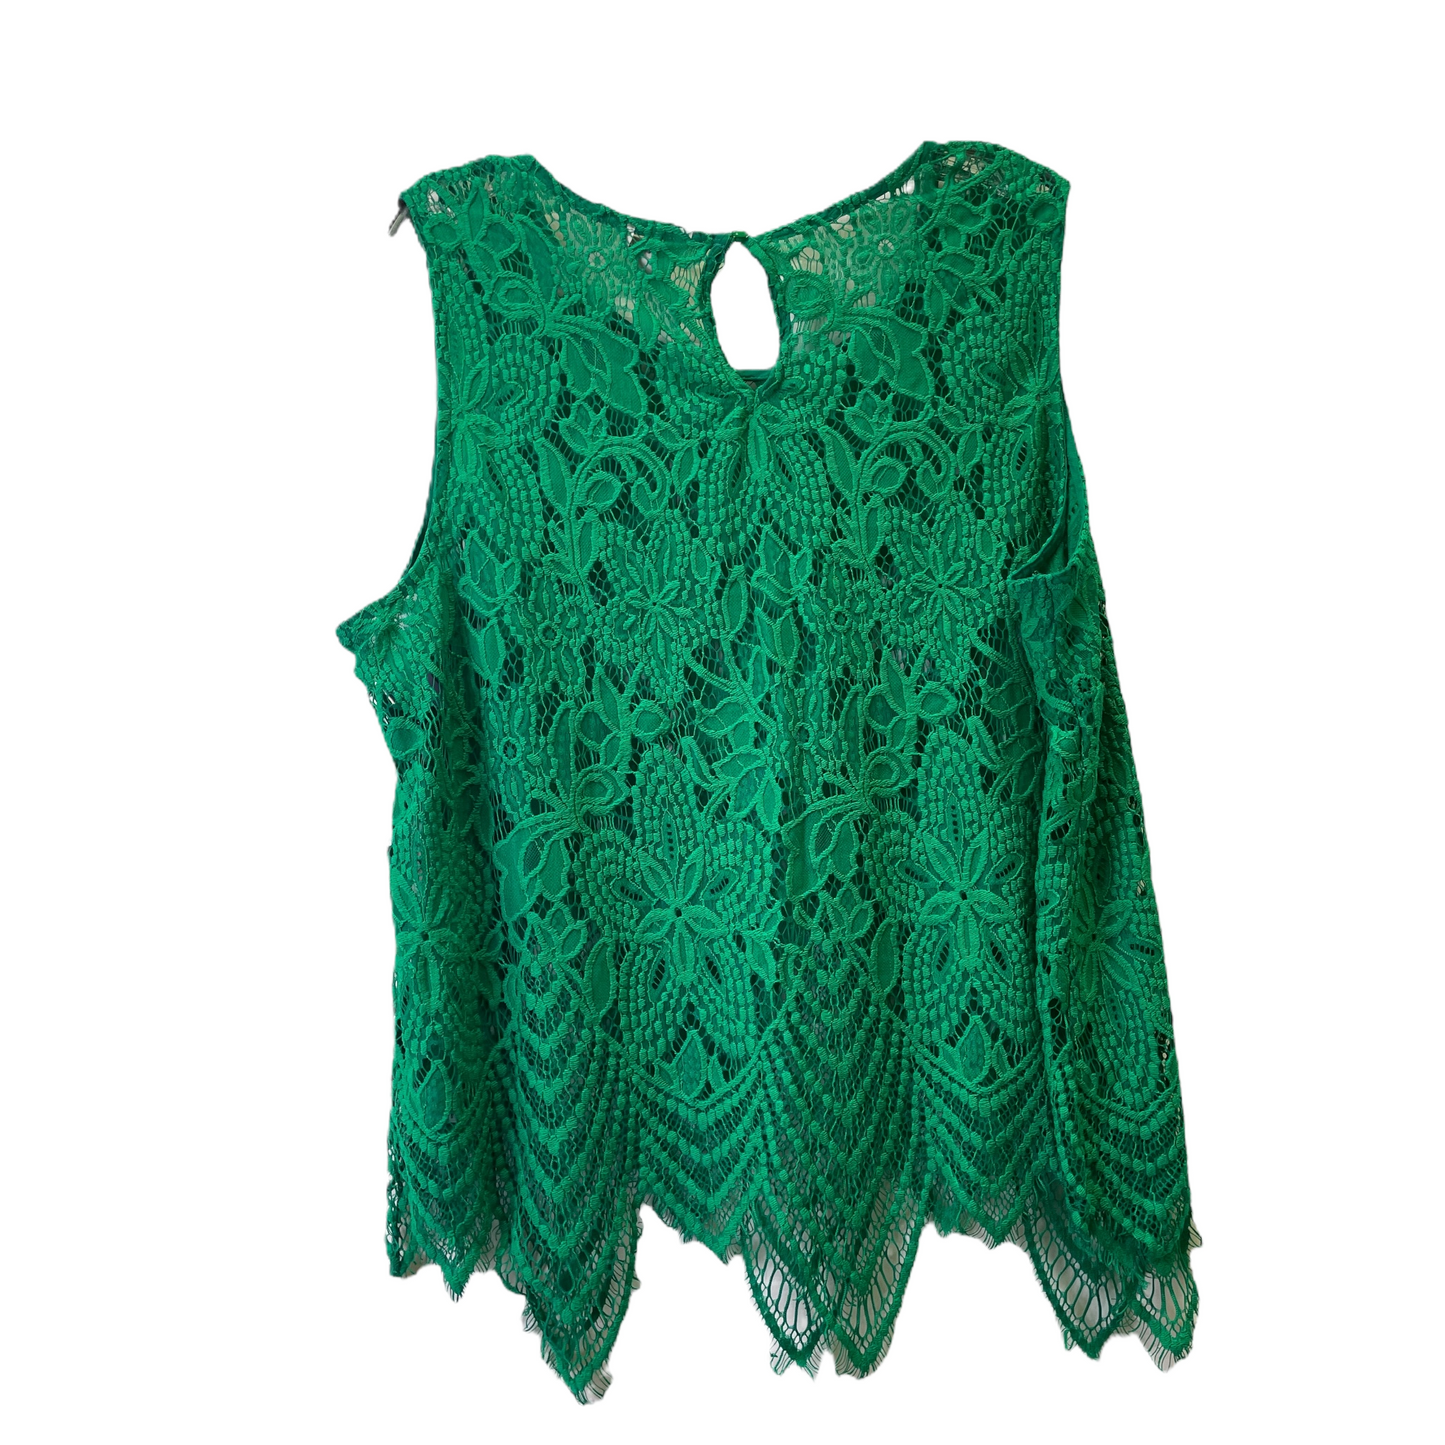 Green Top Sleeveless By Cato, Size: 3x